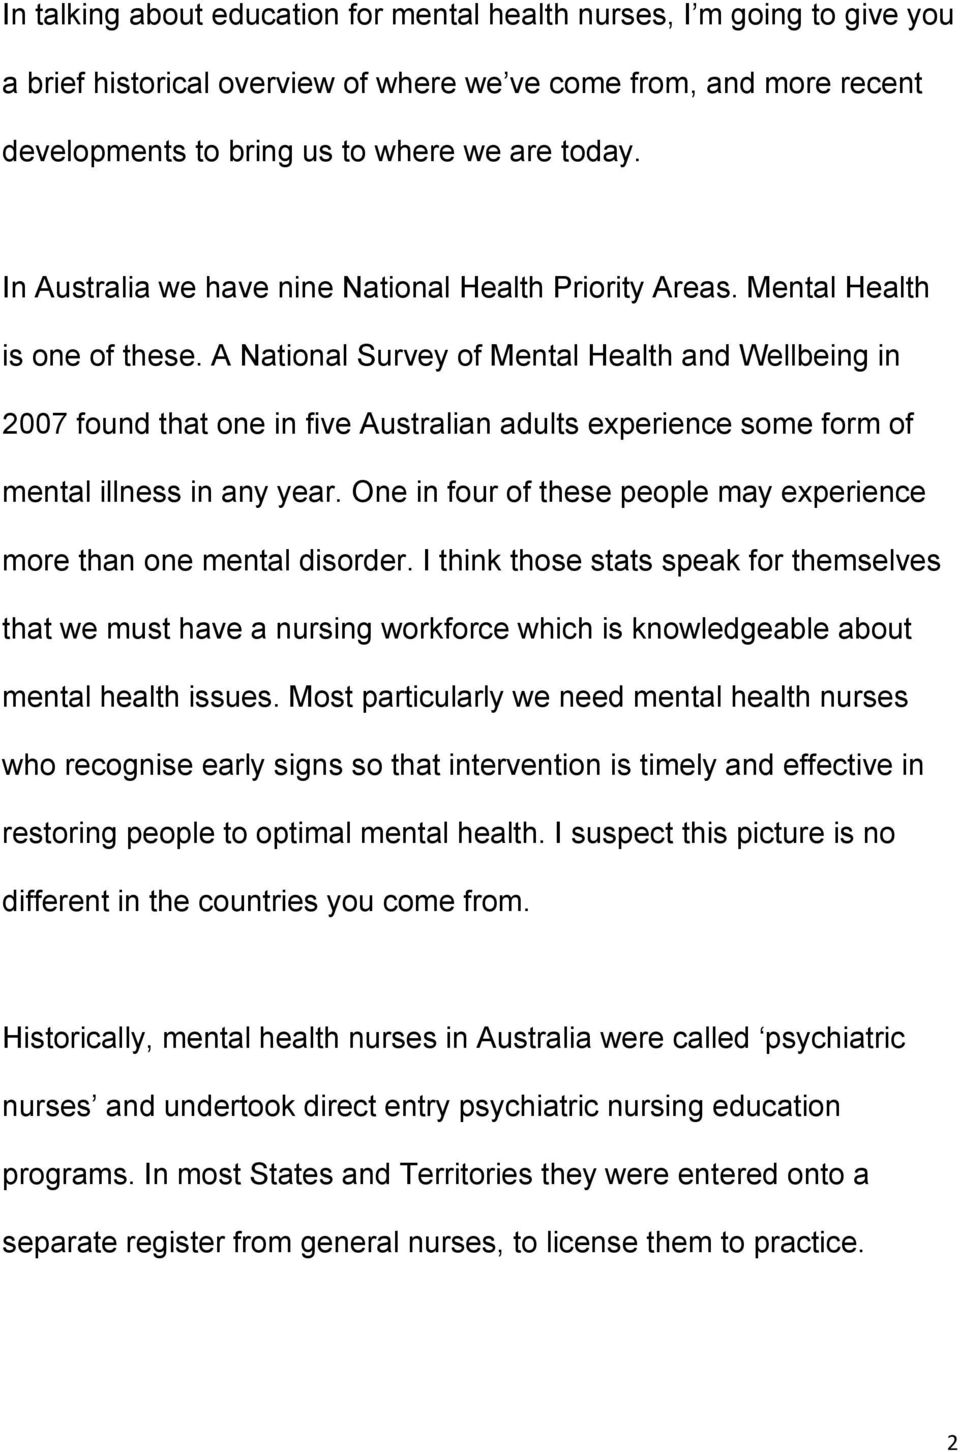 A National Survey of Mental Health and Wellbeing in 2007 found that one in five Australian adults experience some form of mental illness in any year.